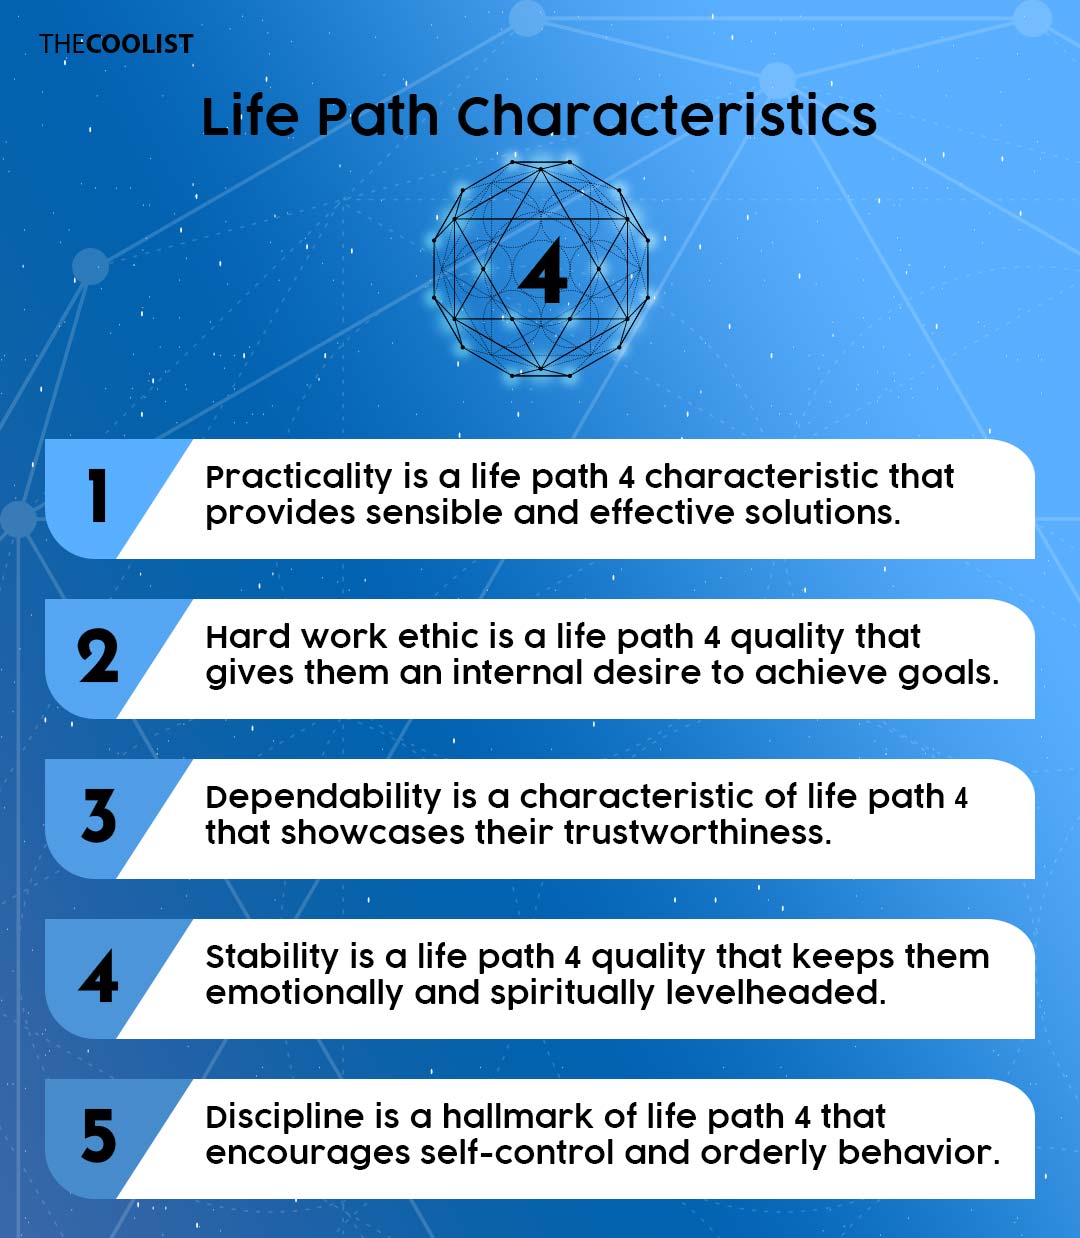 Infographic for the characteristics of life path 4